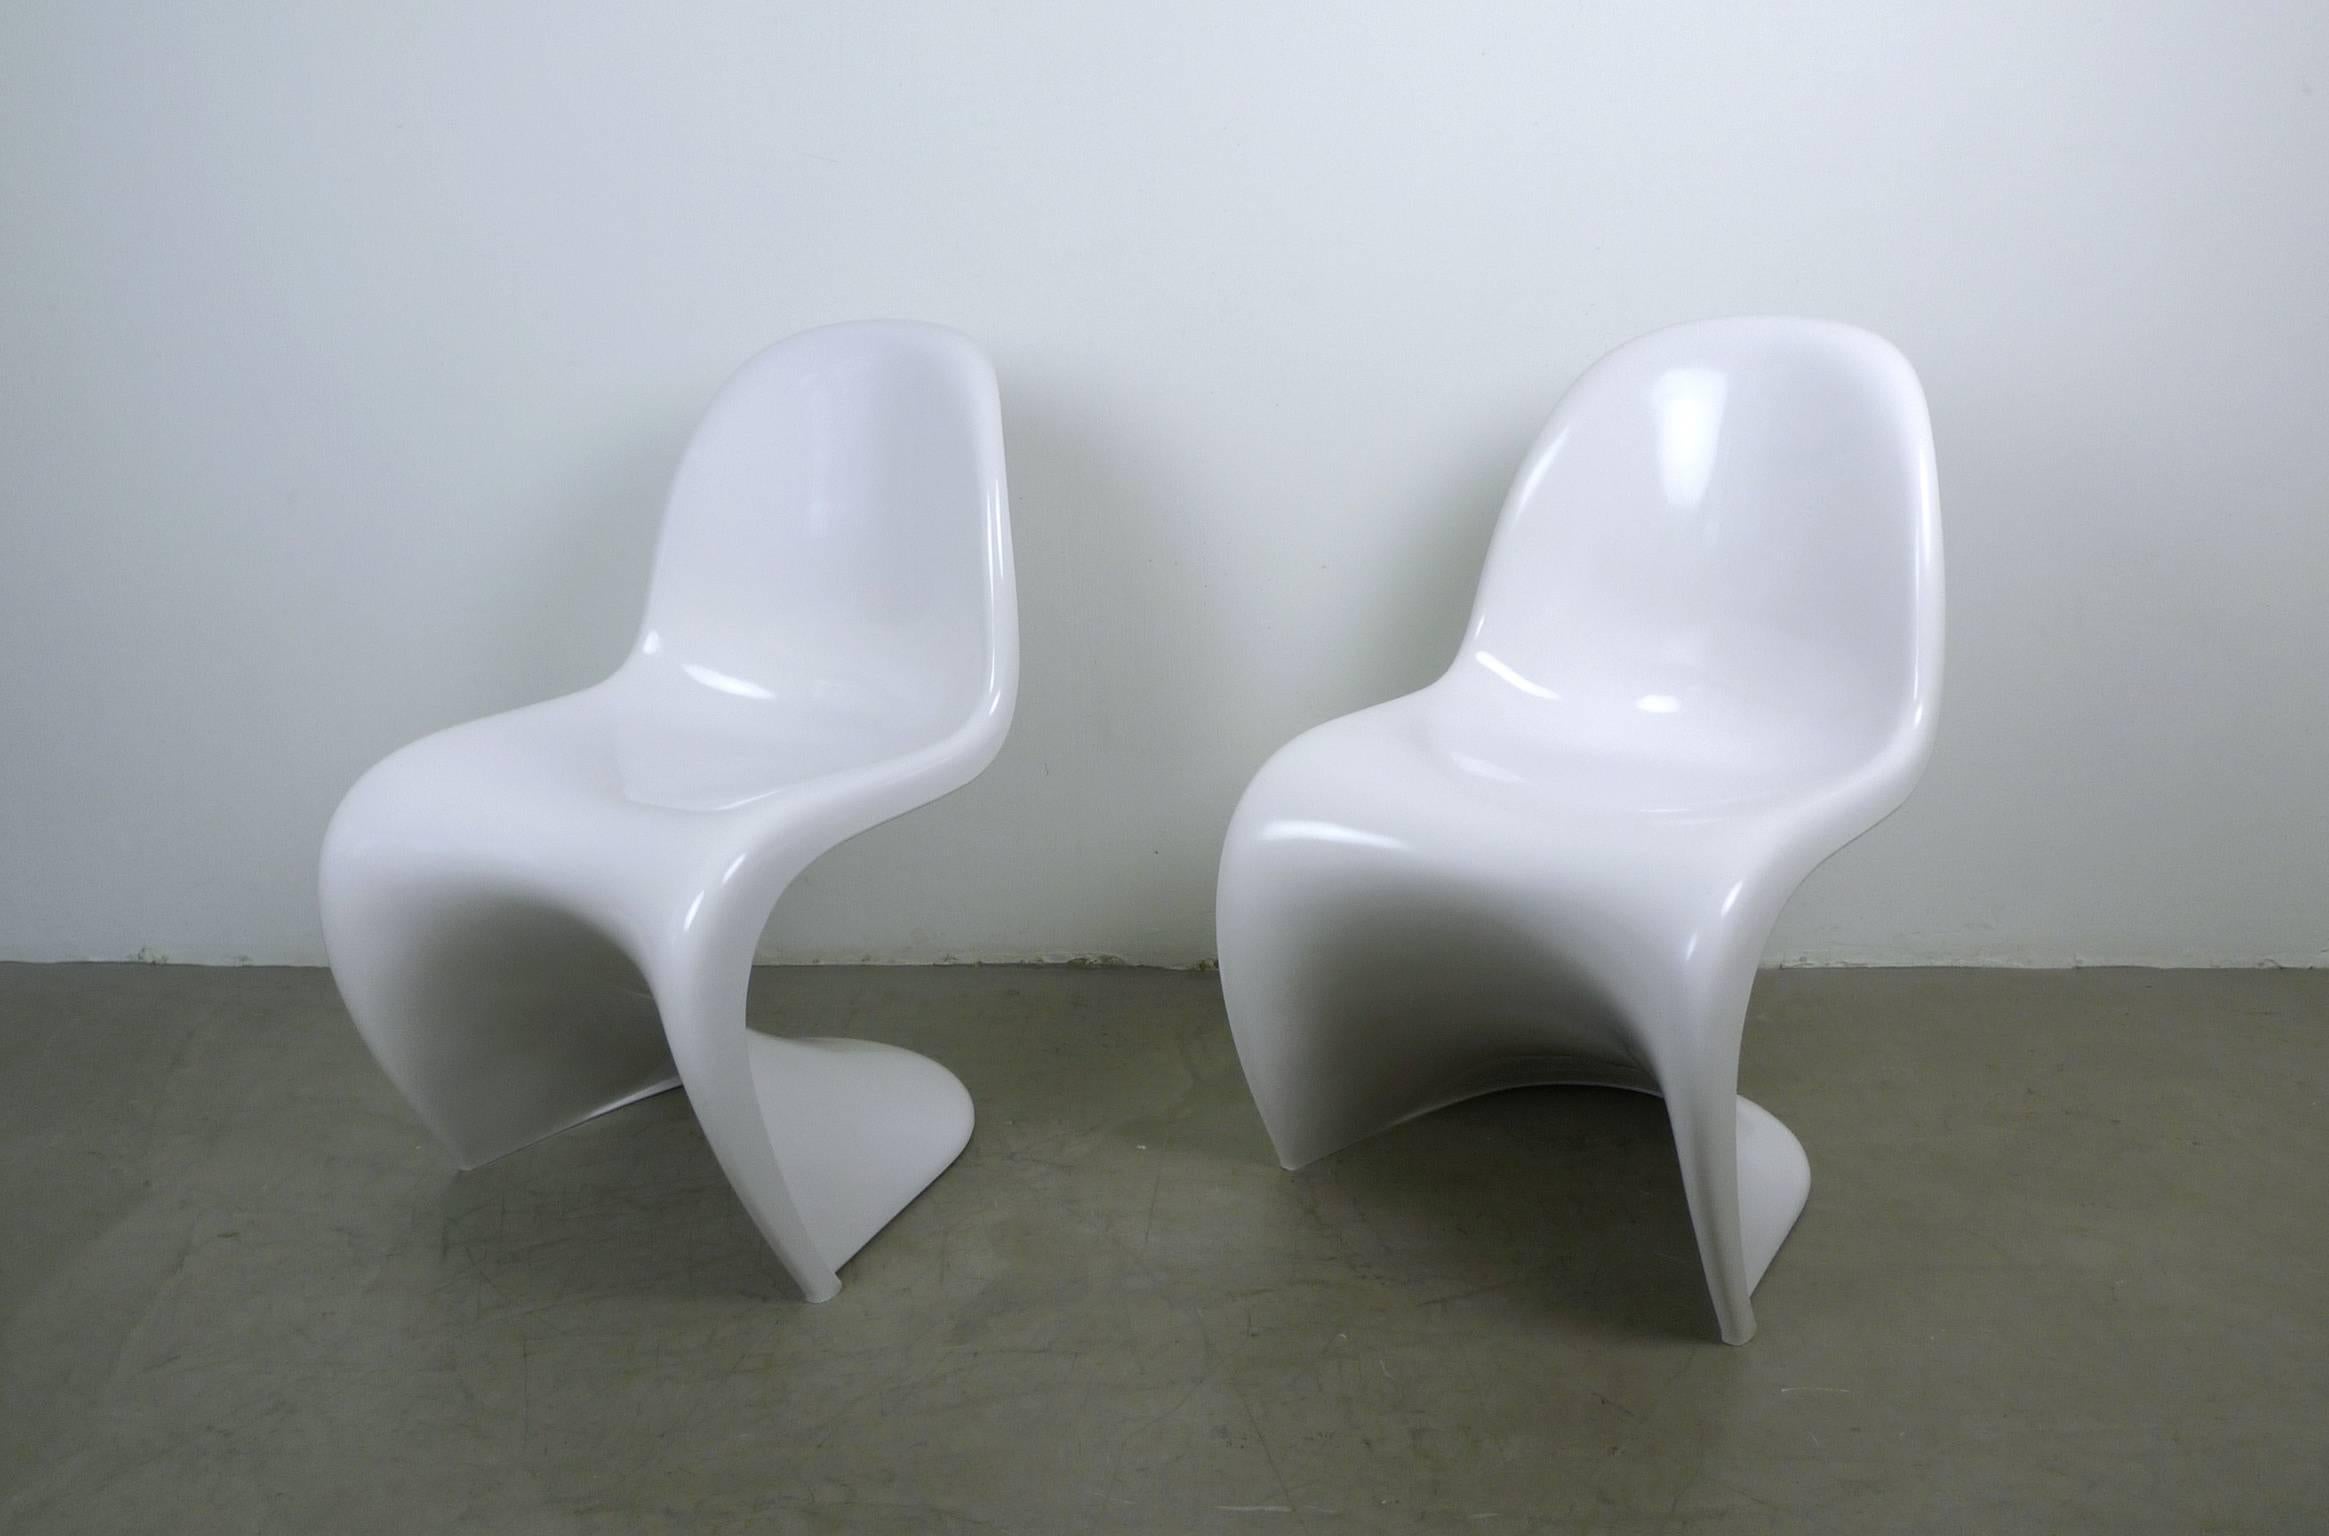 This set of two Panton chairs is made of white colored thermoplastic polystyrene and was produced in 1971 and 1972 by Fehlbaum in Germany under license from Herman Miller. The pair belongs to the third production series (1971-1979) and has